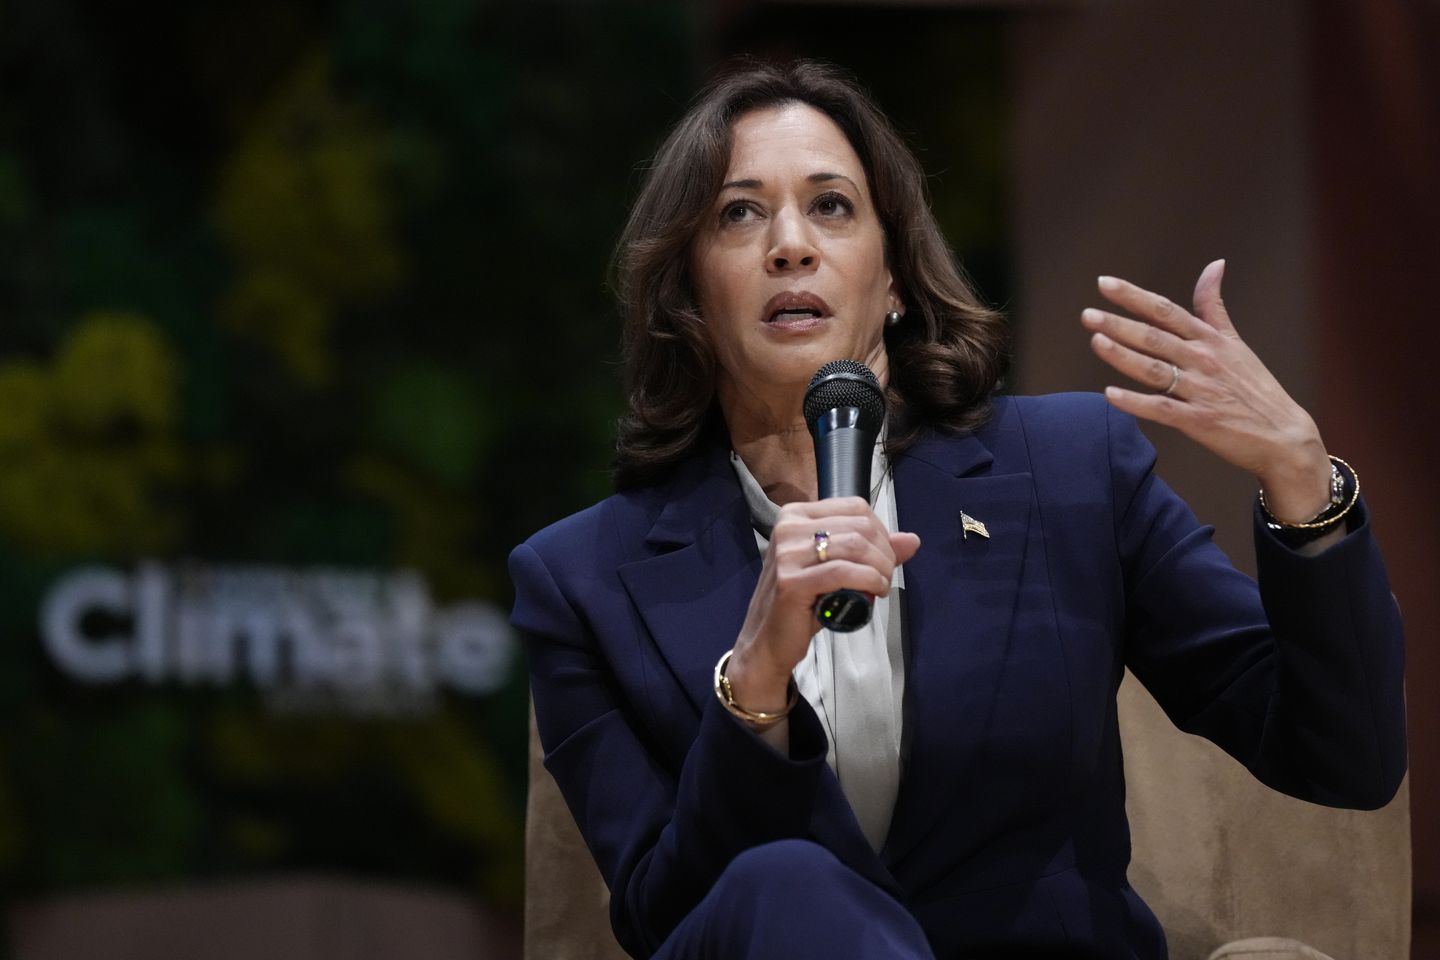 Kamala Harris says restricting abortions is 'immoral'